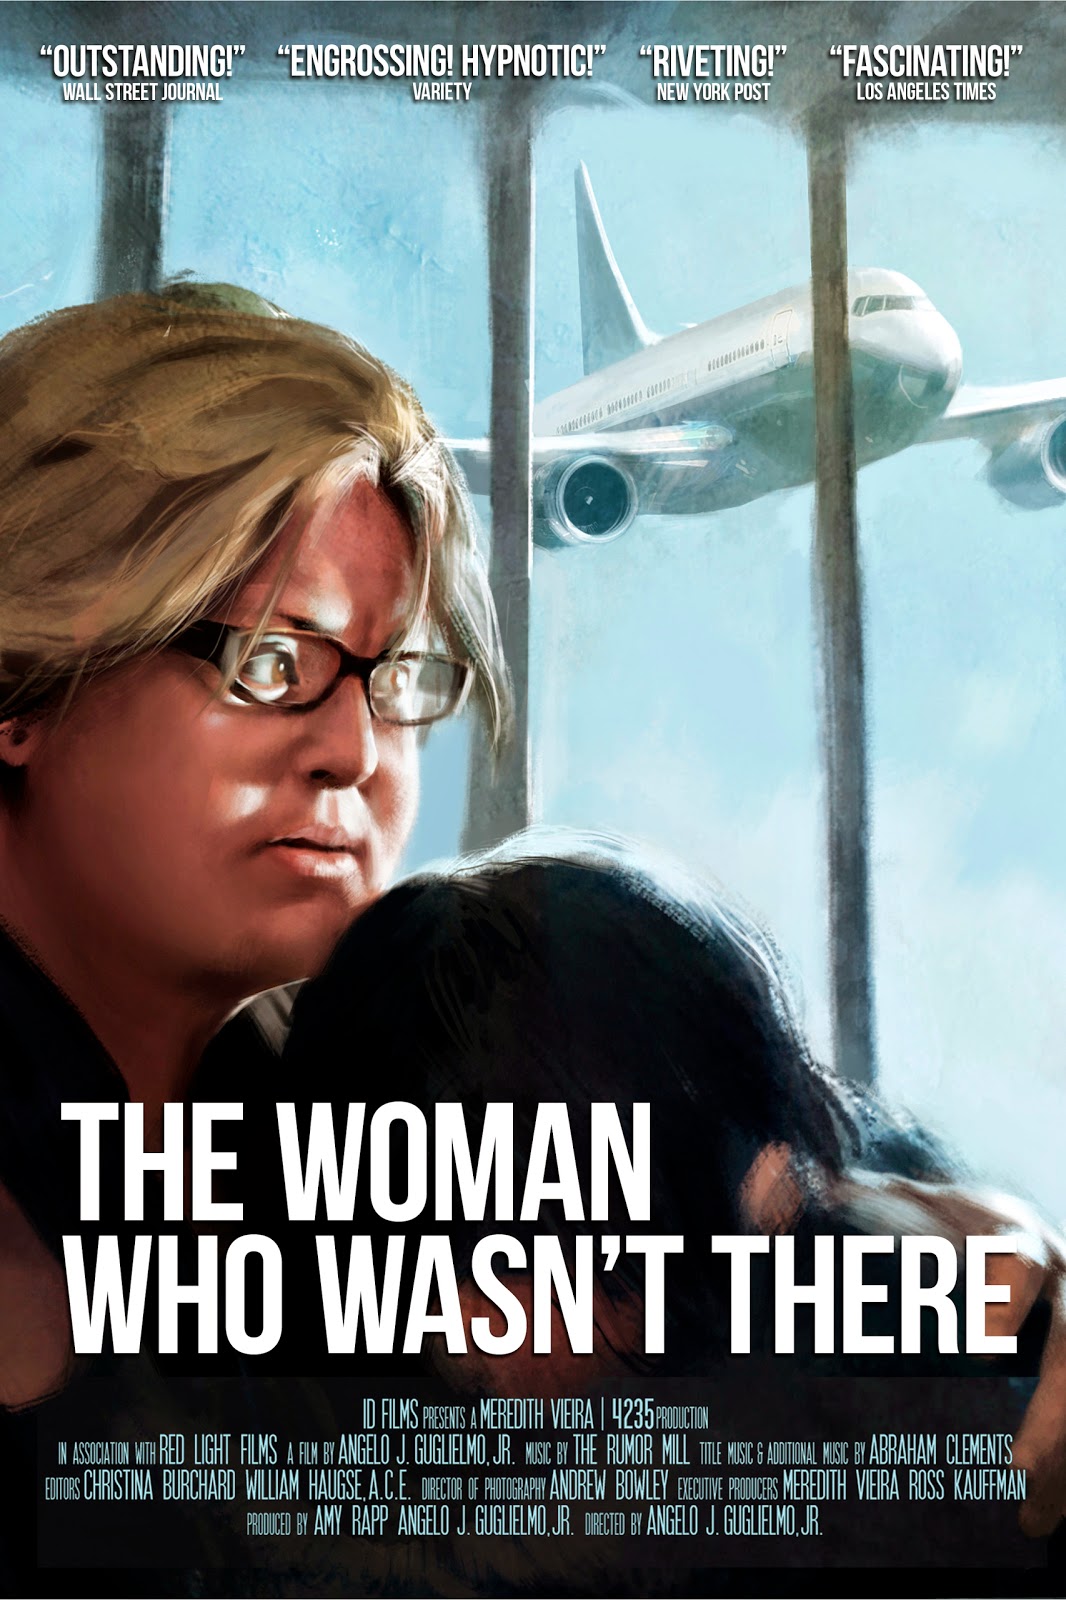 The Woman Who Wasnt There The True Story of an Incredible Deception
Epub-Ebook